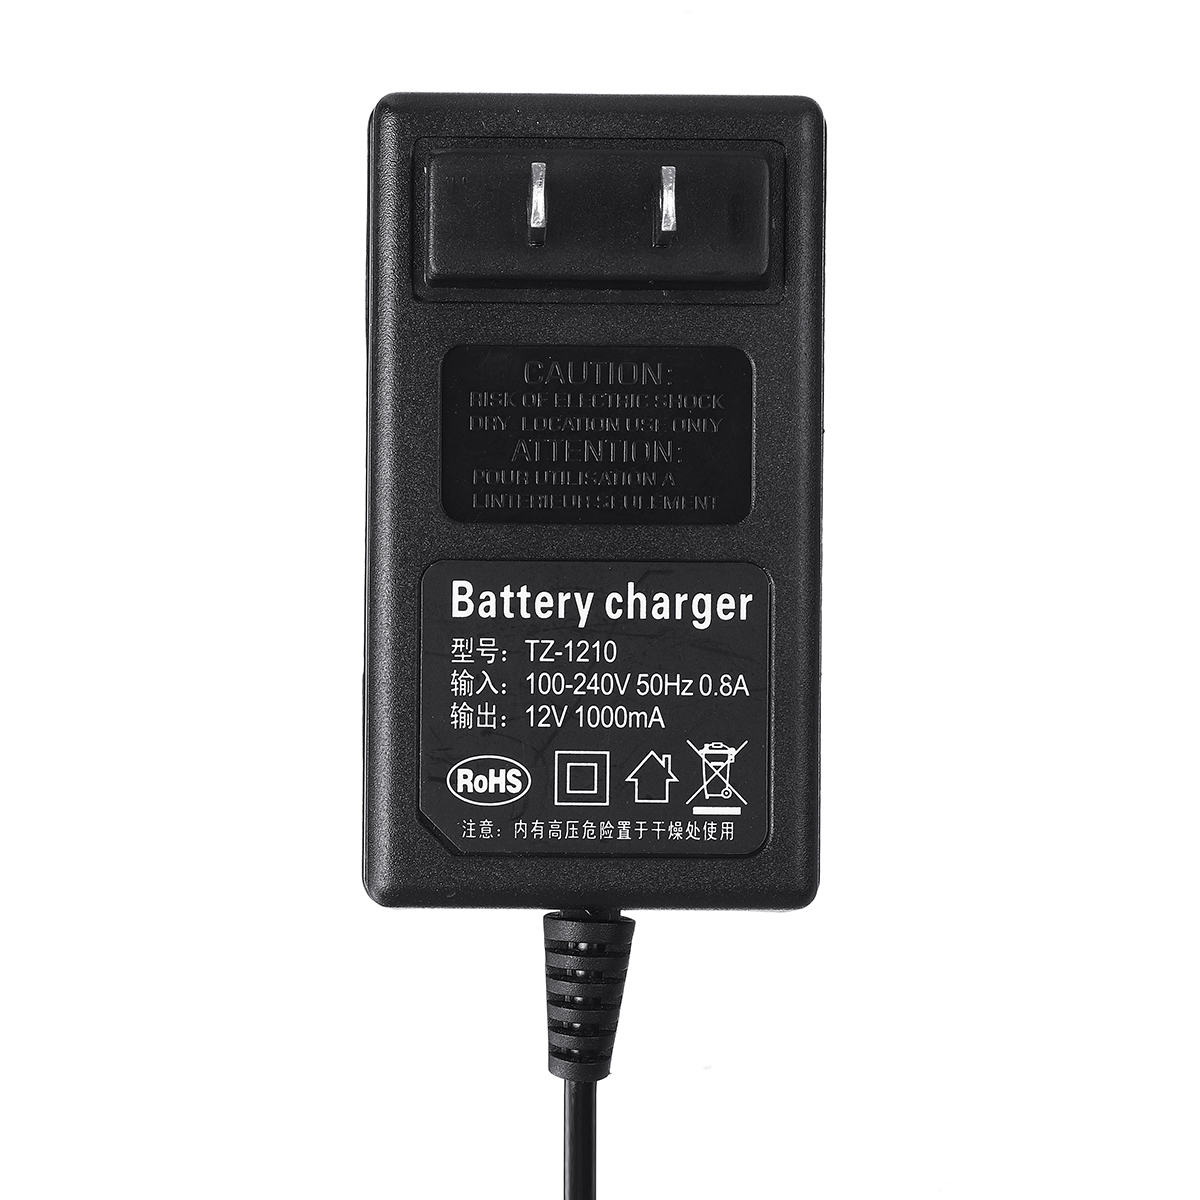 Find AC 100V-240V 50Hz 0.6A Input 12V 1000mAh Output Battery Charger for Makita Electric Drill General Battery for Sale on Gipsybee.com with cryptocurrencies